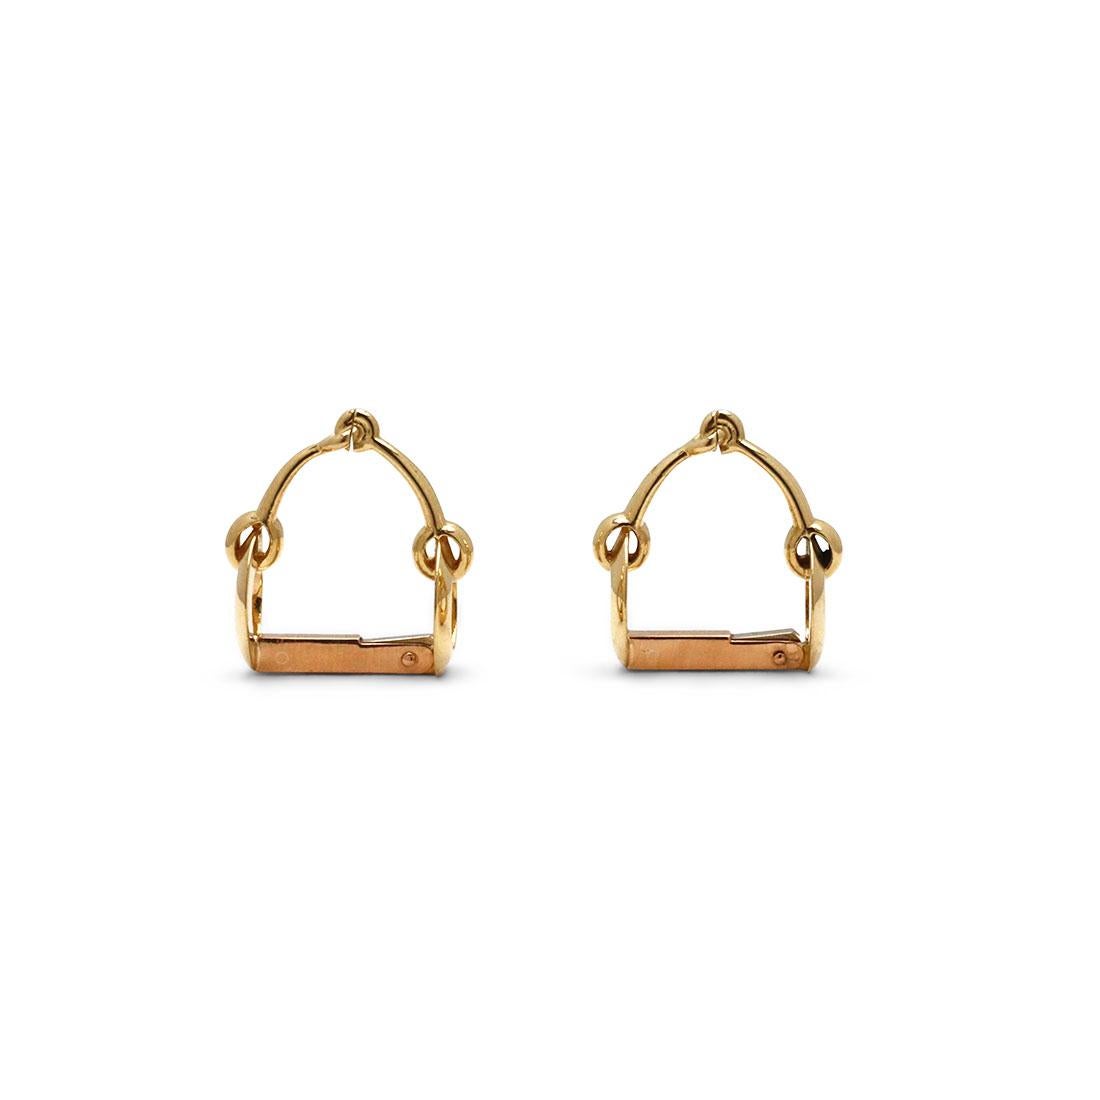 Authentic pair of Mellerio cufflinks crafted in 18 karat yellow gold. These cufflinks feature an equestrian motif - riding bits - and fit around the outside of the shirt cuff. Signed Mellerio and with hallmarks. Cufflinks are presented without the